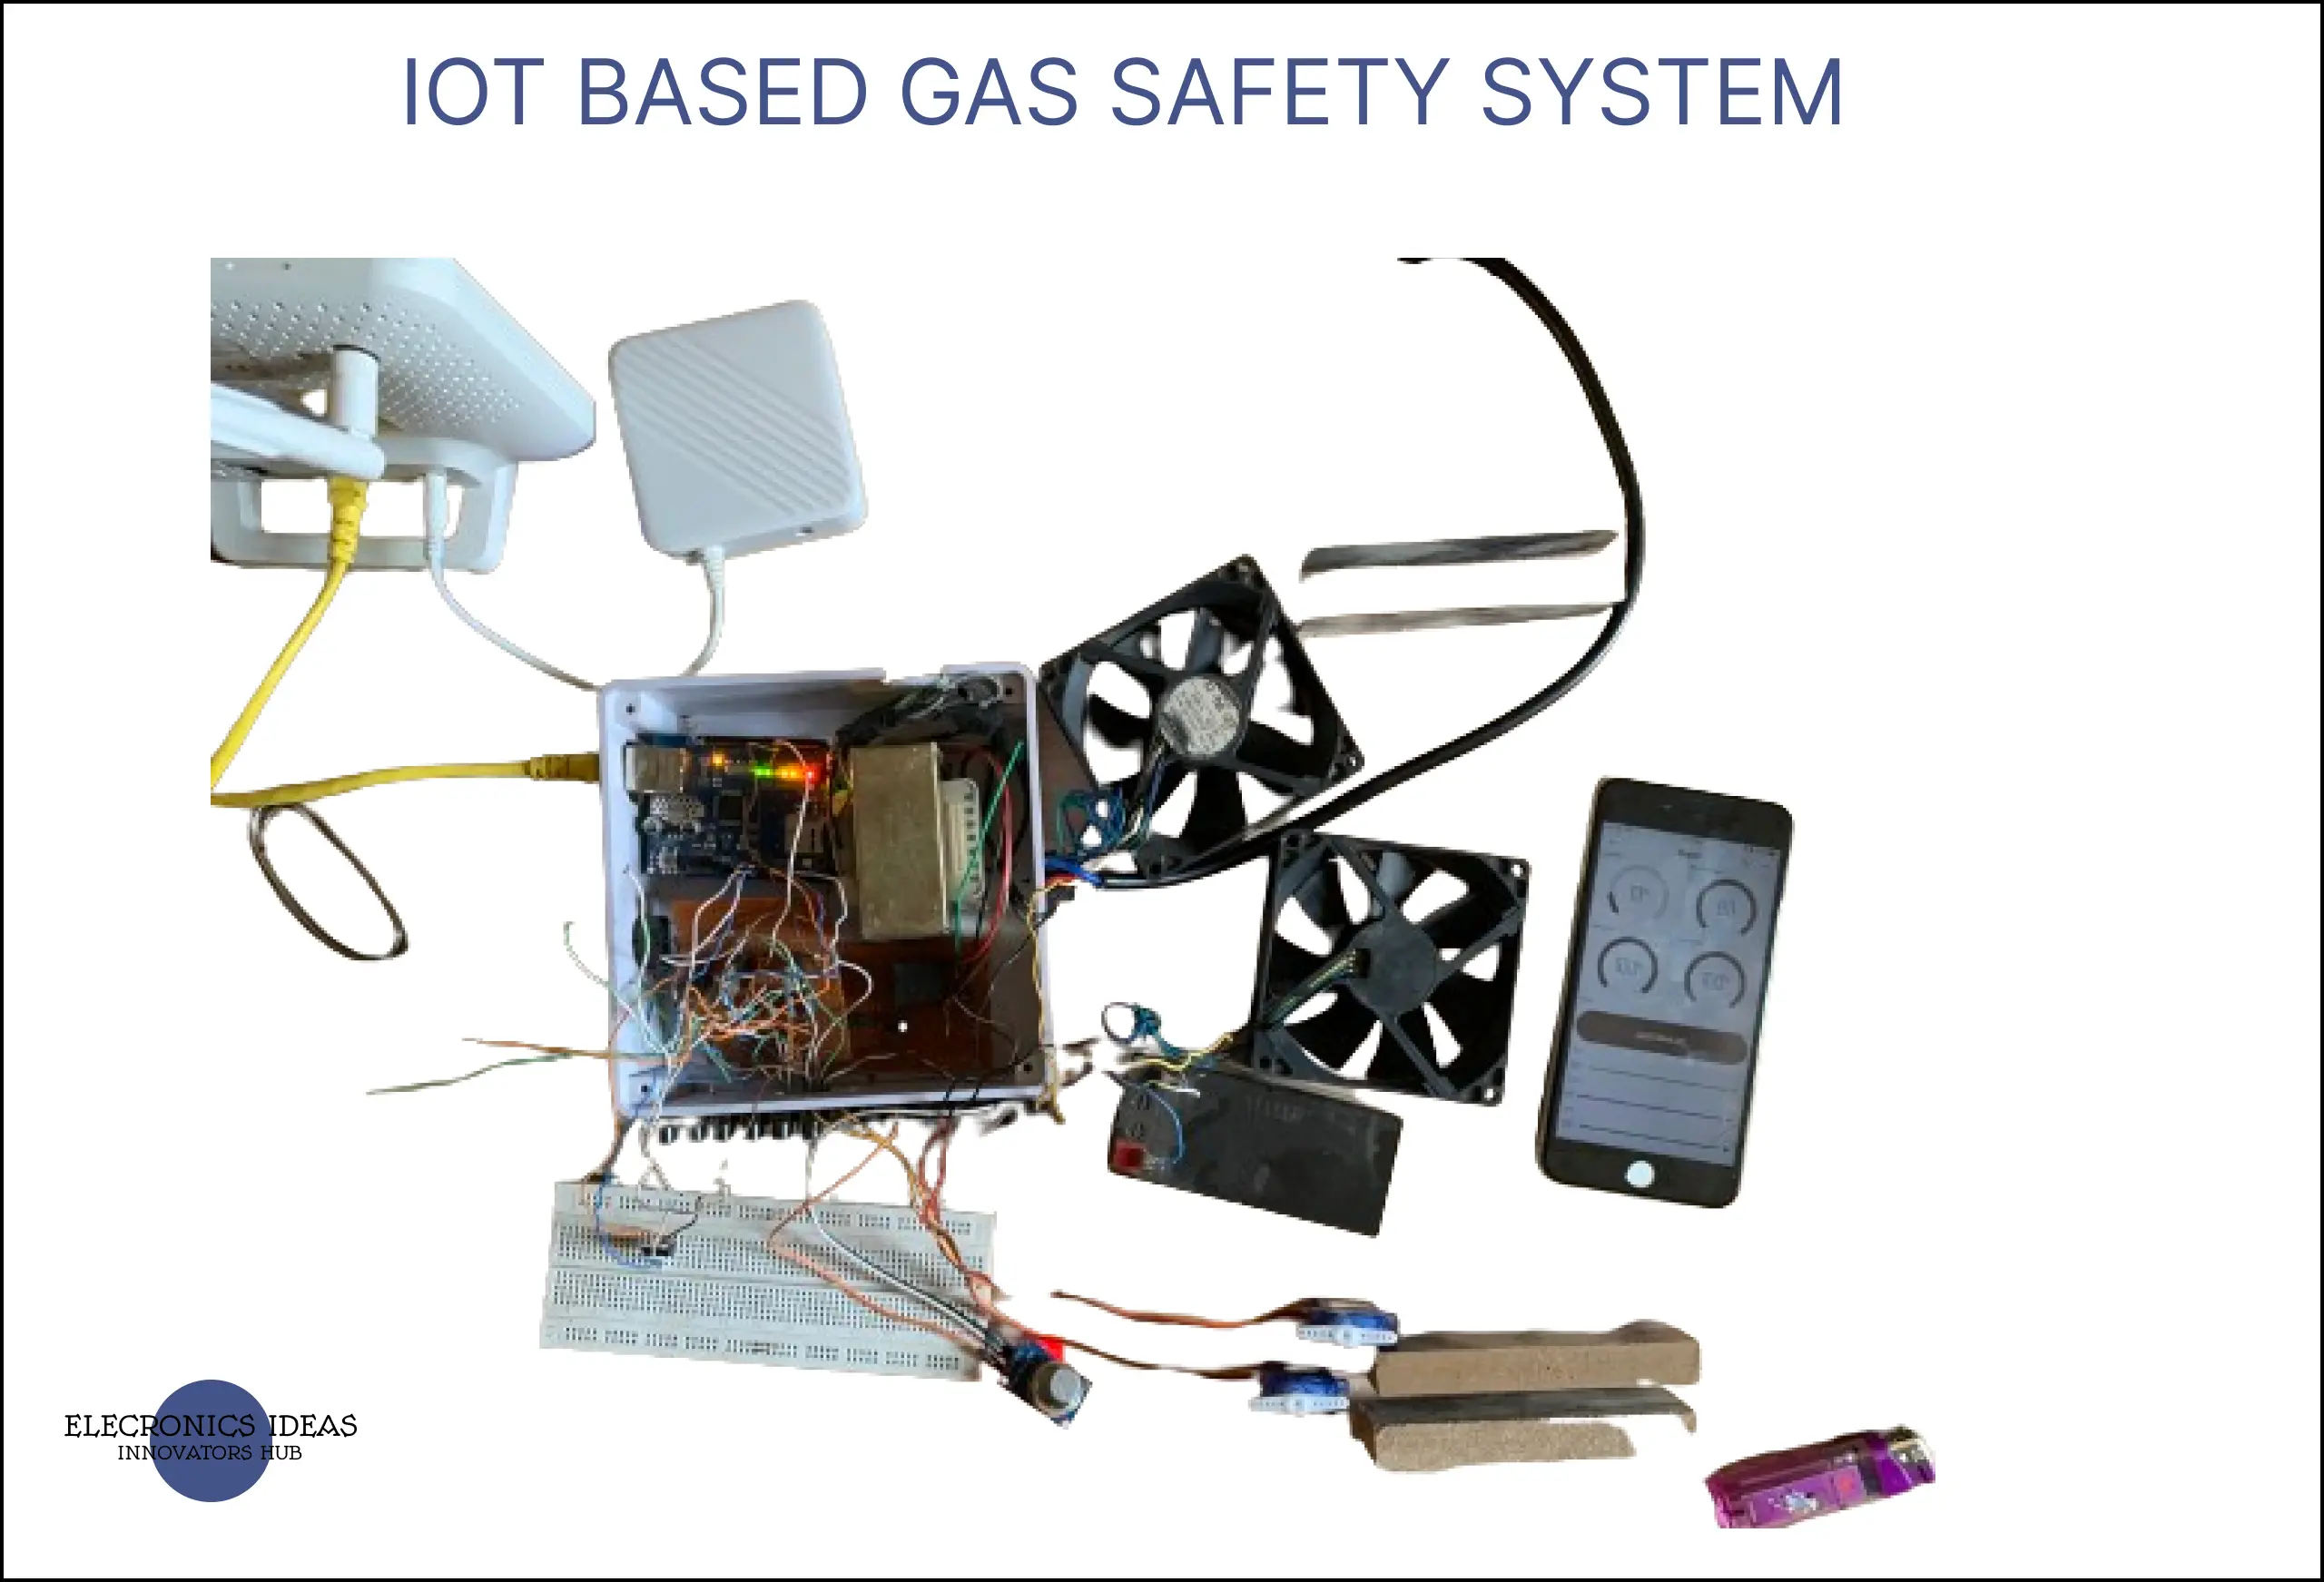 IOT based gas safety system